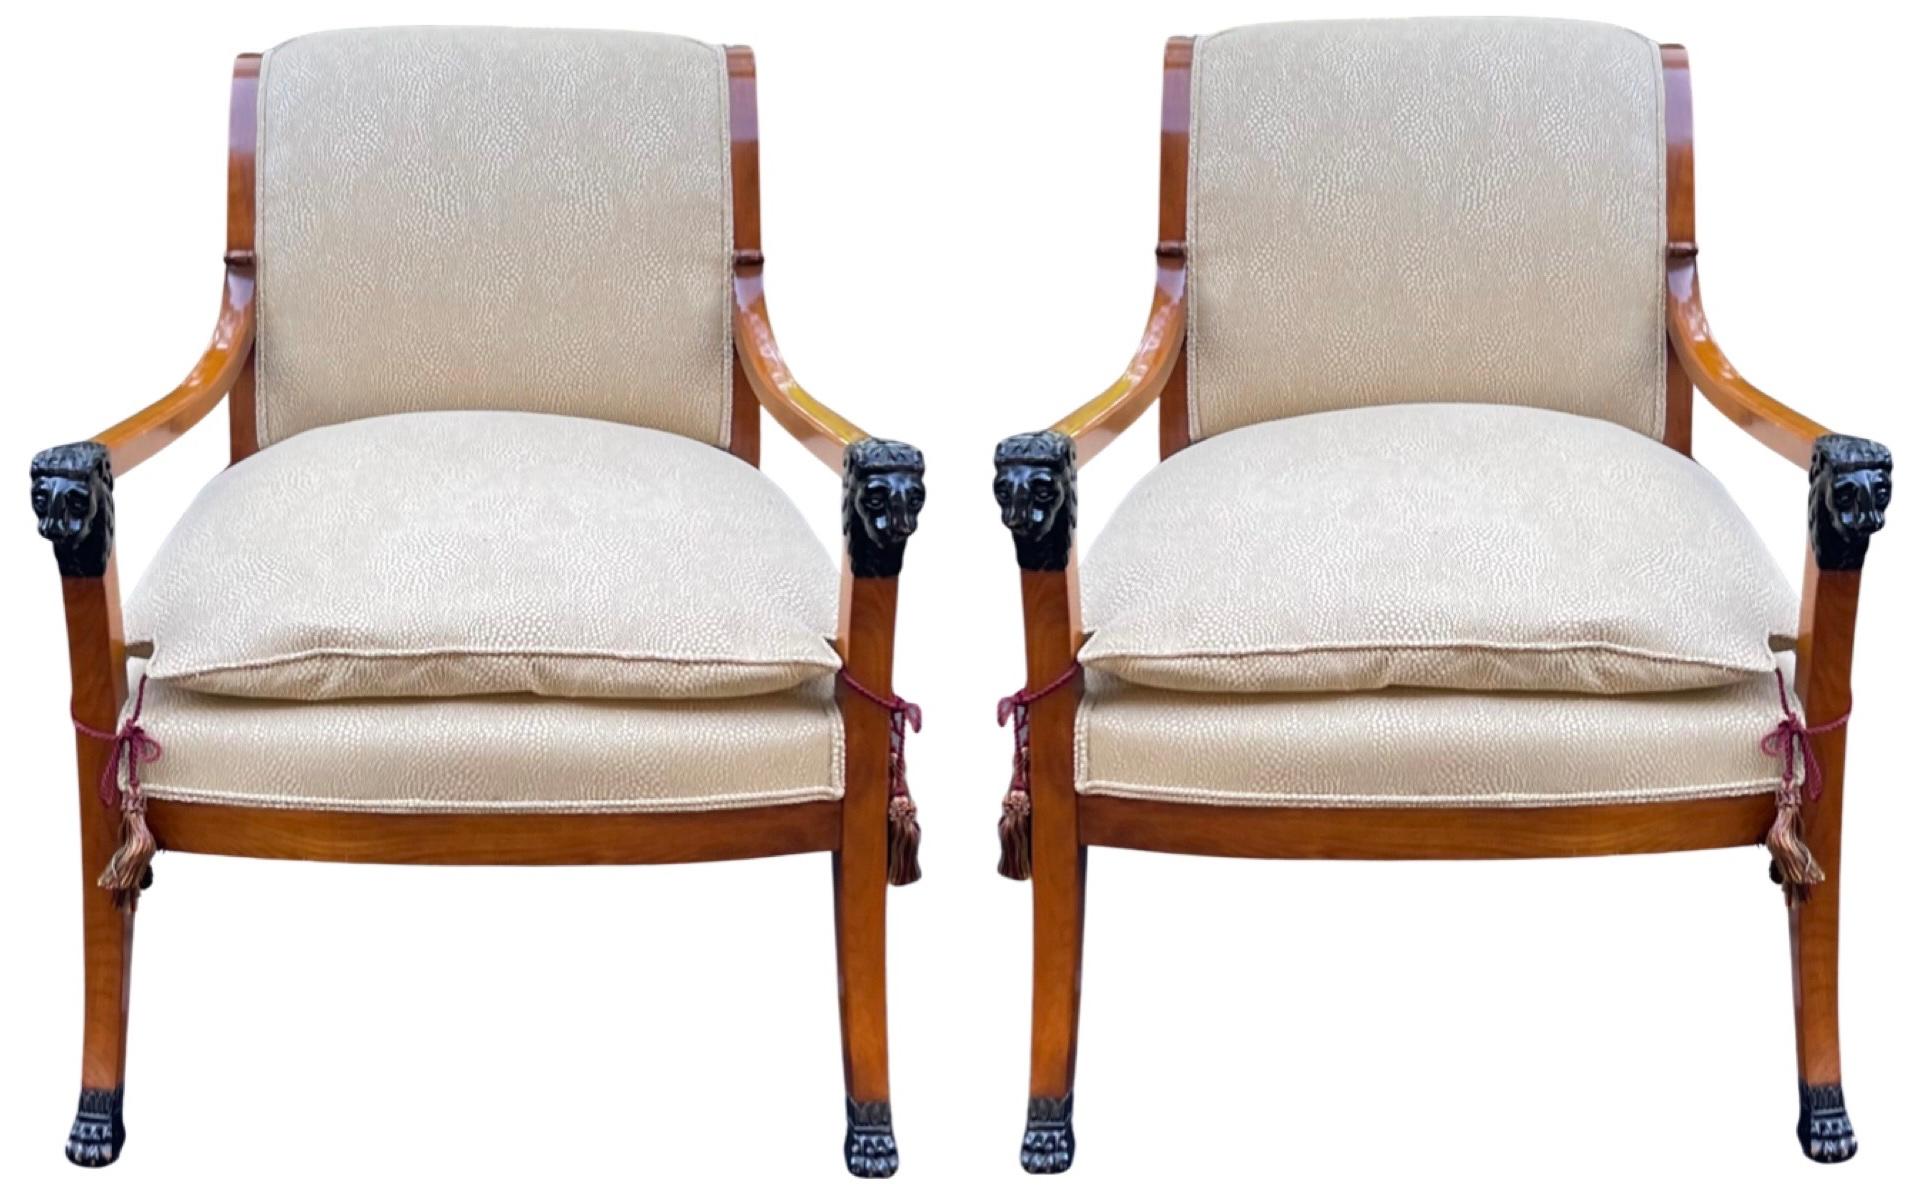 This is a pair of walnut and ebony arm chairs with neo-classical style frames. The steak walnut almost gives them a Biedermeier look and feel. The vintage upholstery is in very good condition. They are unmarked. Arm; 25”. 

My shipping is for the